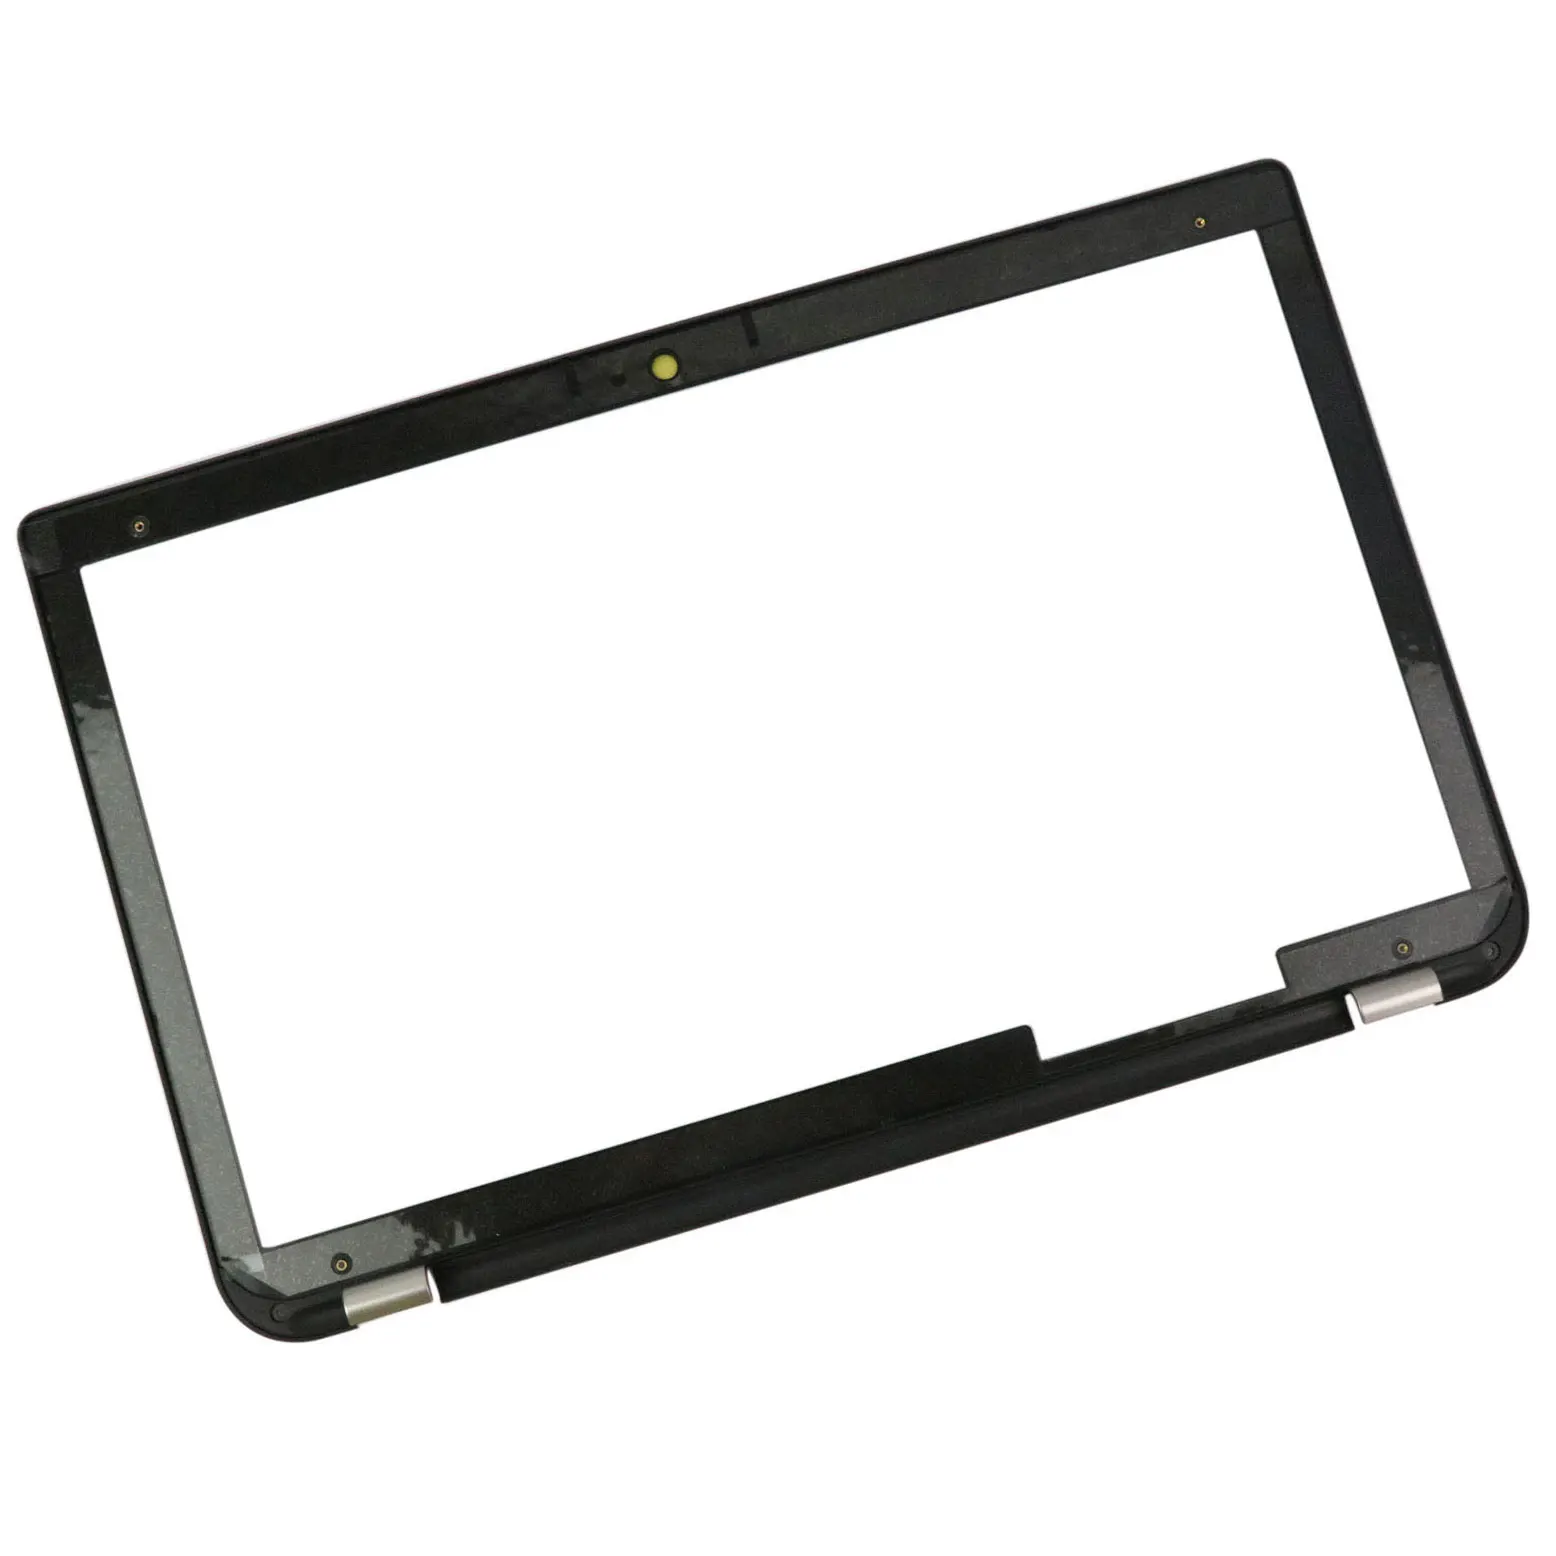 FCQLR New for Toshiba P55T-A5118 P55t-A5202 15.6 Front Bezel LCD Screen case Cover H000056150